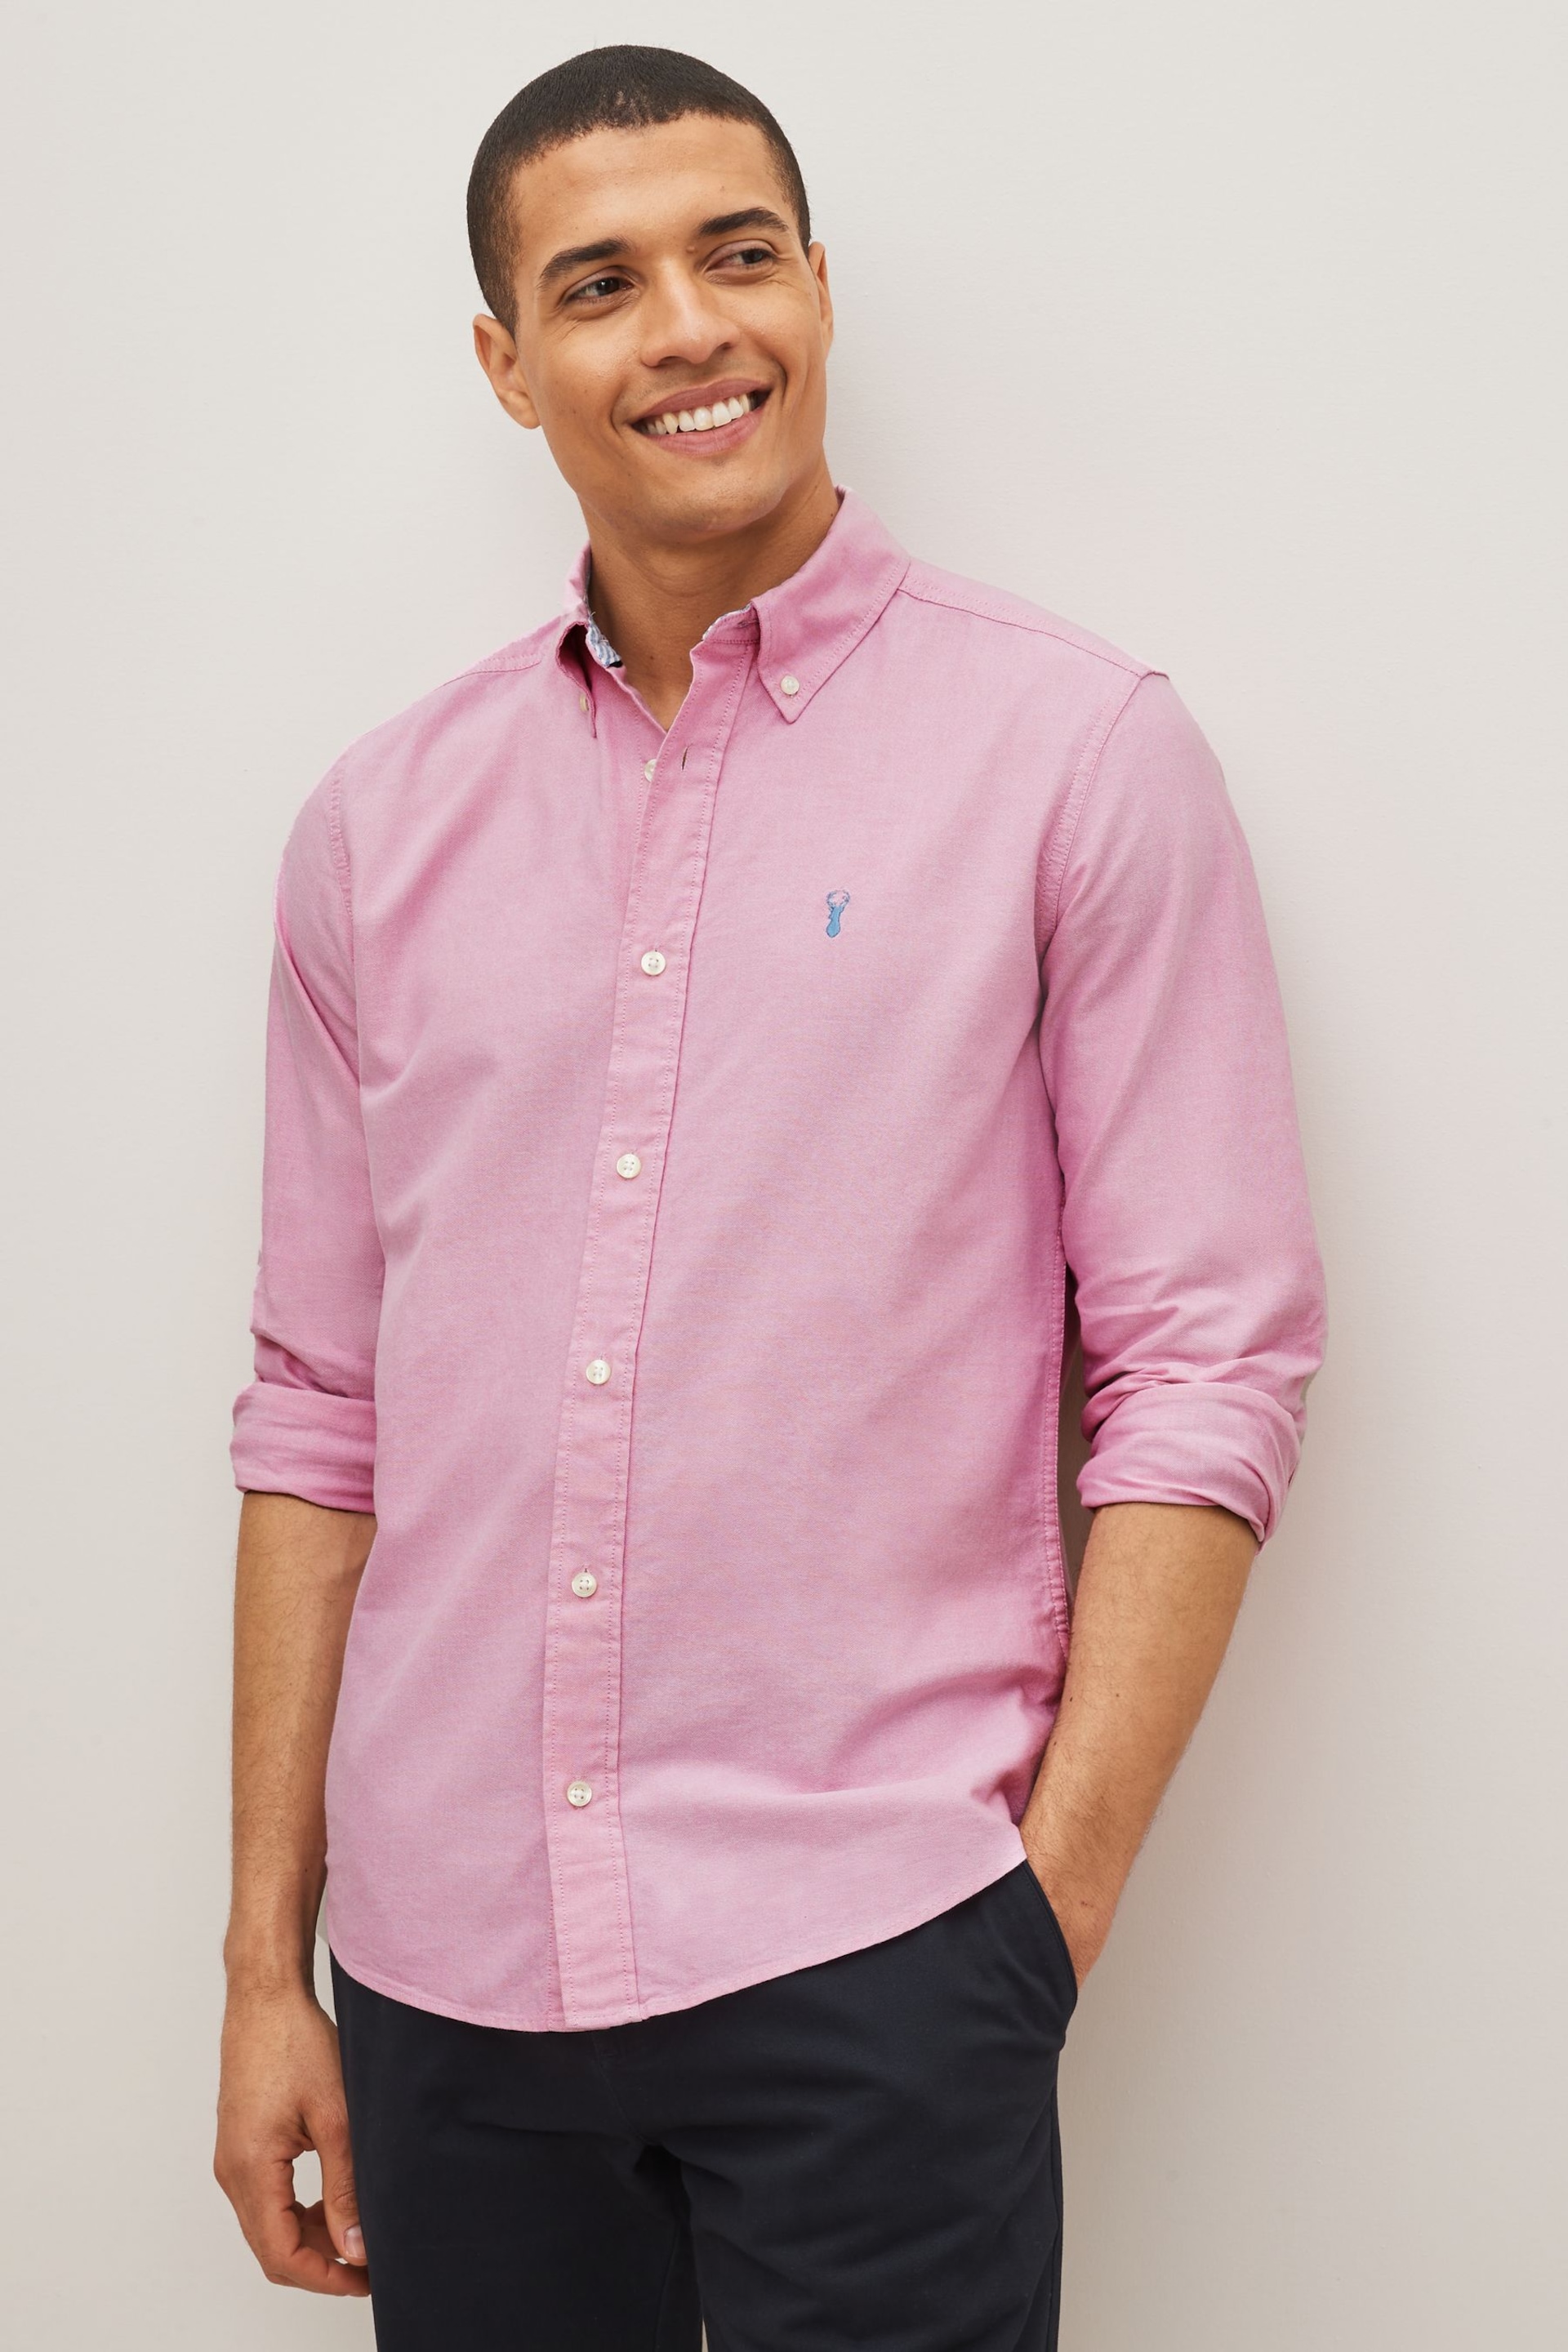 Pink Slim Fit Long Sleeve Oxford Shirt - Image 1 of 4